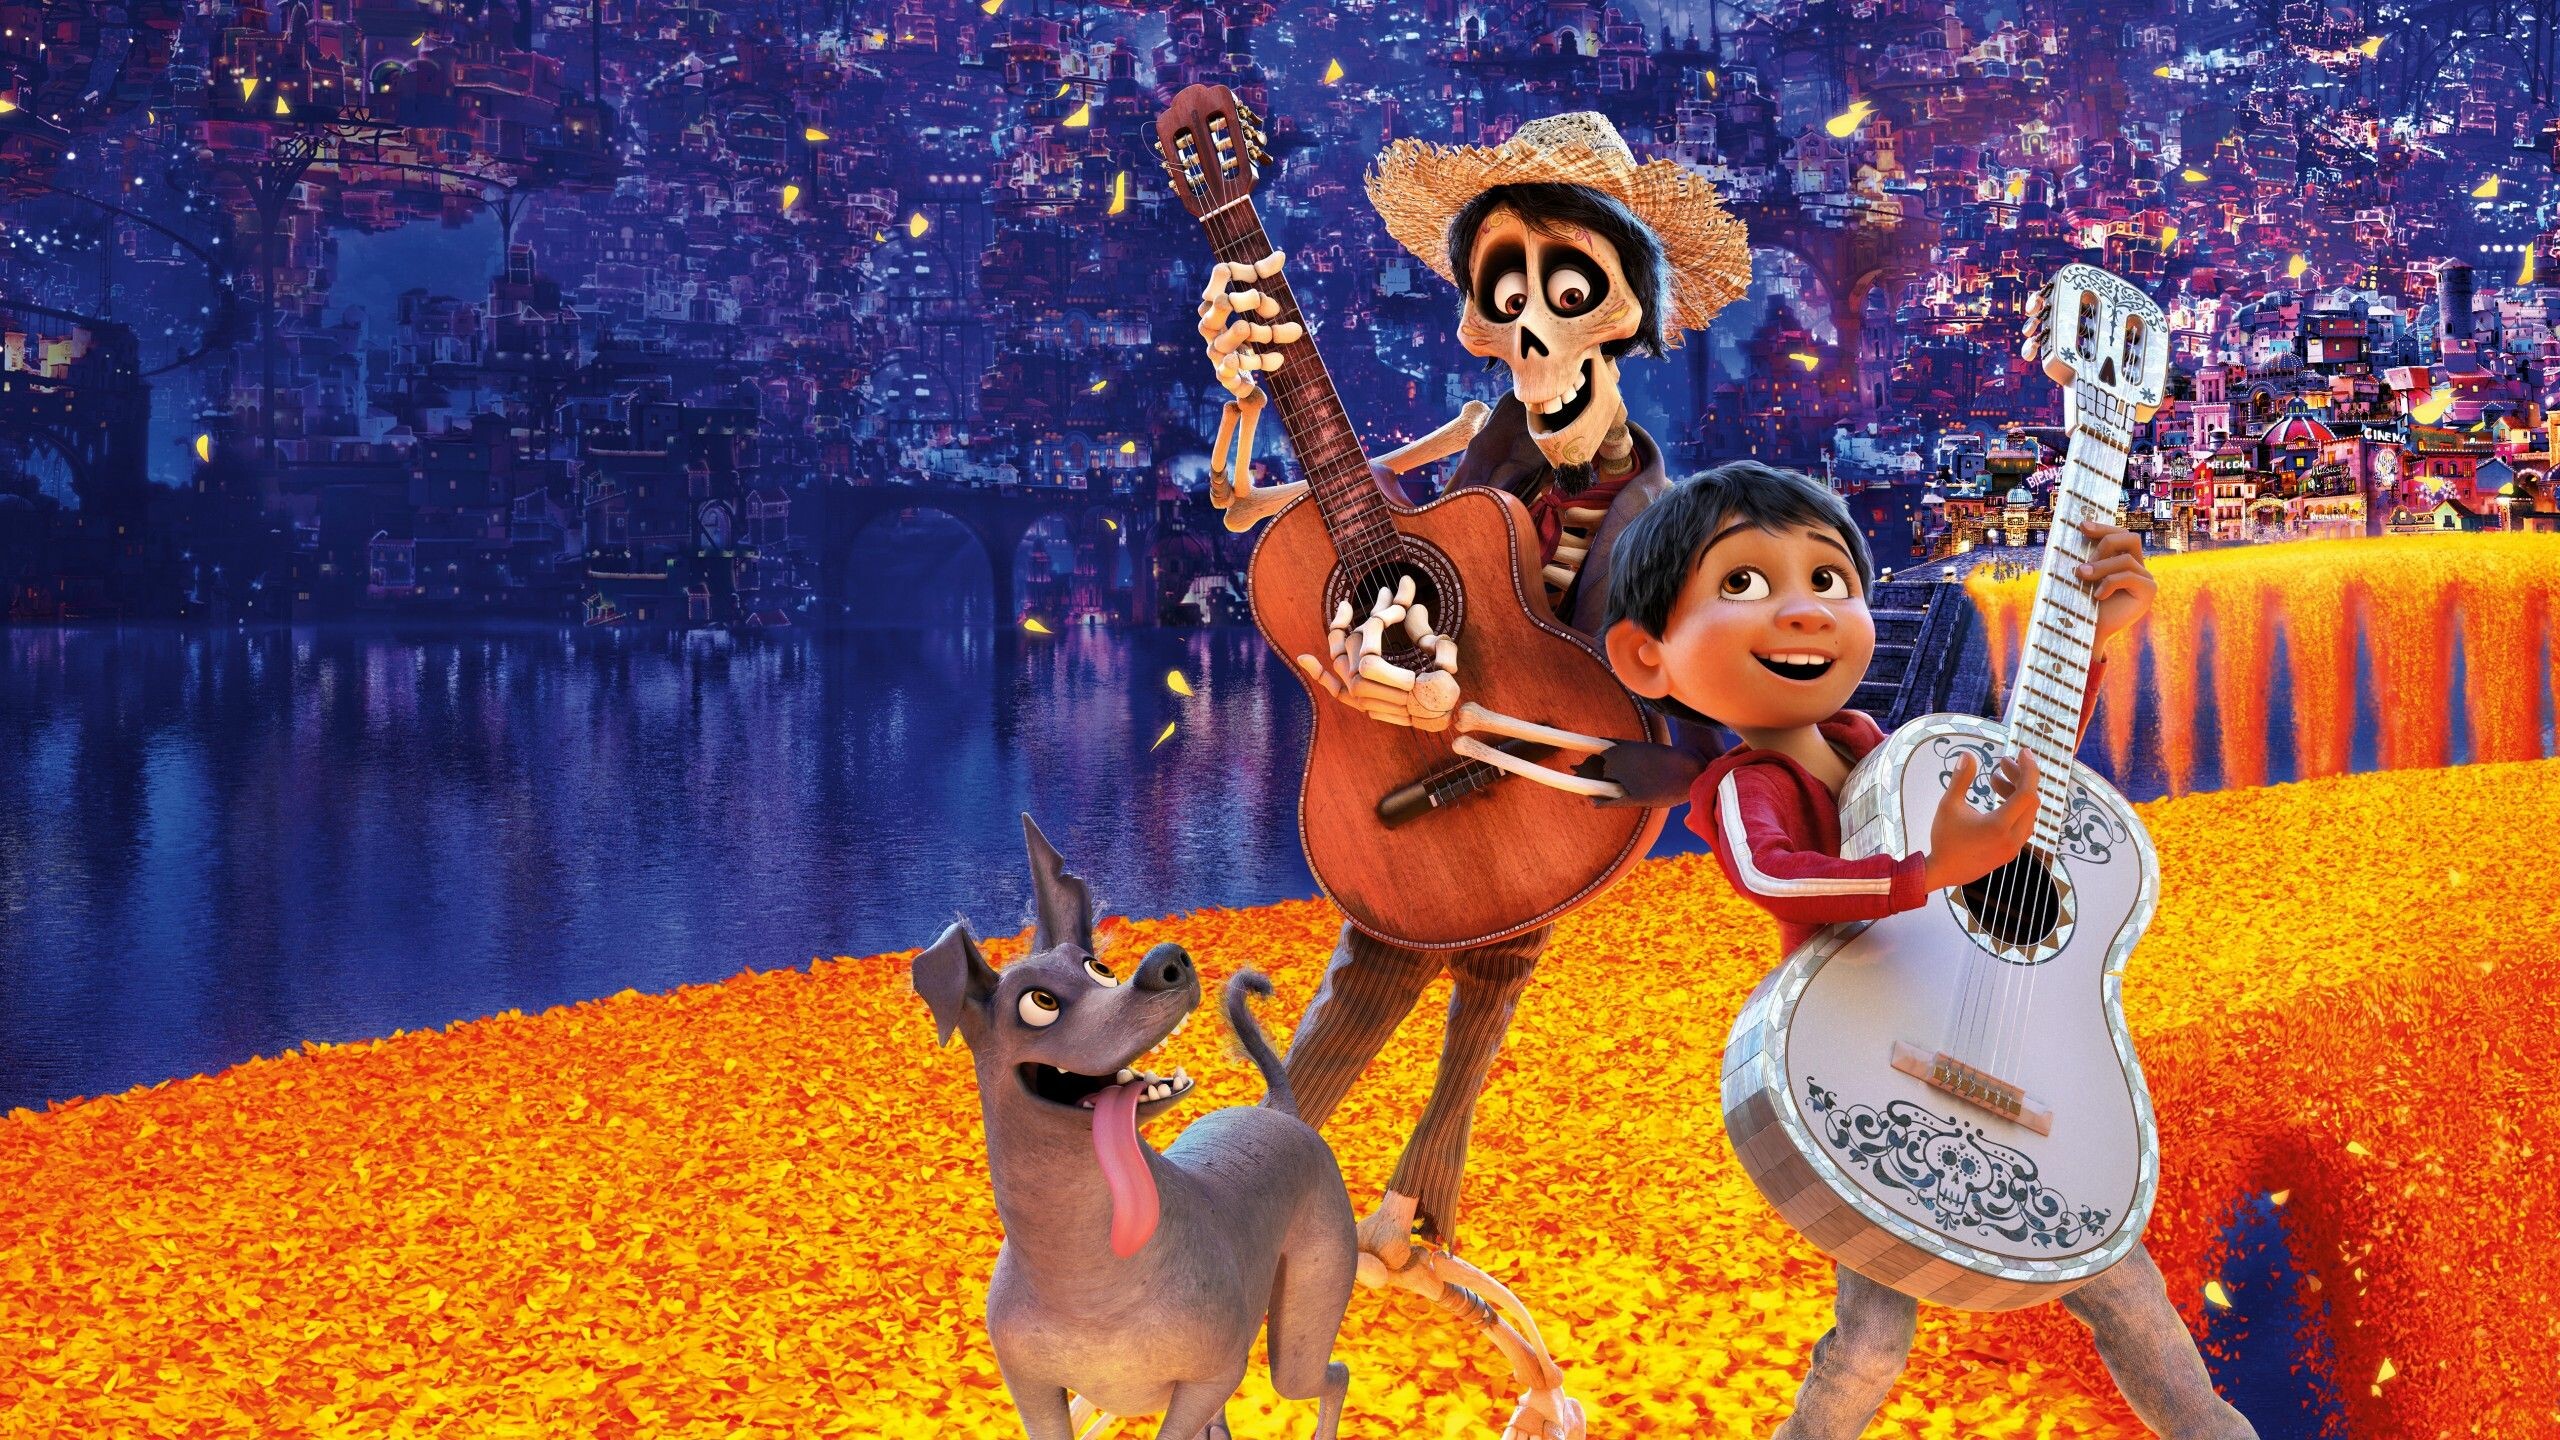 Coco (Cartoon): The film tells the story of a 12-year-old Mexican boy named Miguel Rivera who, living in a family of music-hating shoemakers, ends up creating one of the most extraordinary family reunions. 2560x1440 HD Background.